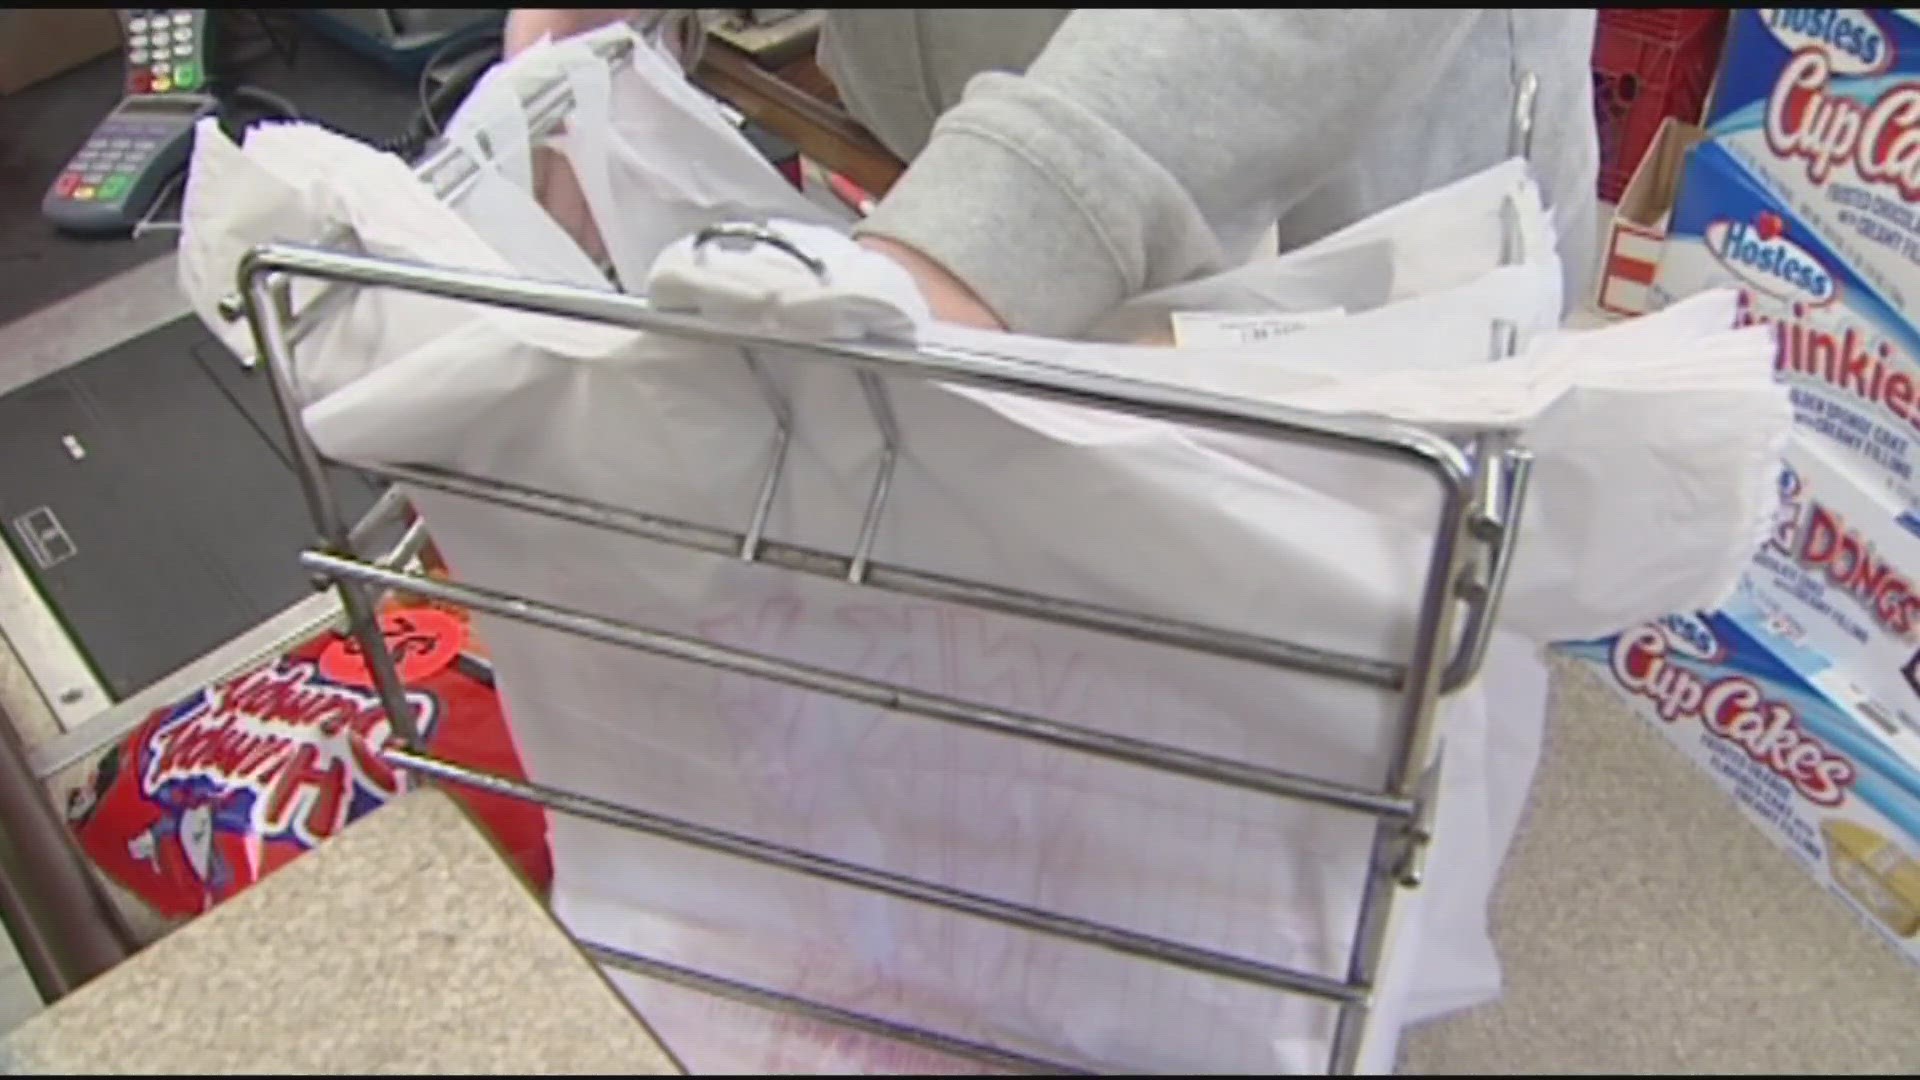 State lawmakers debated a new bill Tuesday that would allow individual cities and towns to ban plastic bags.